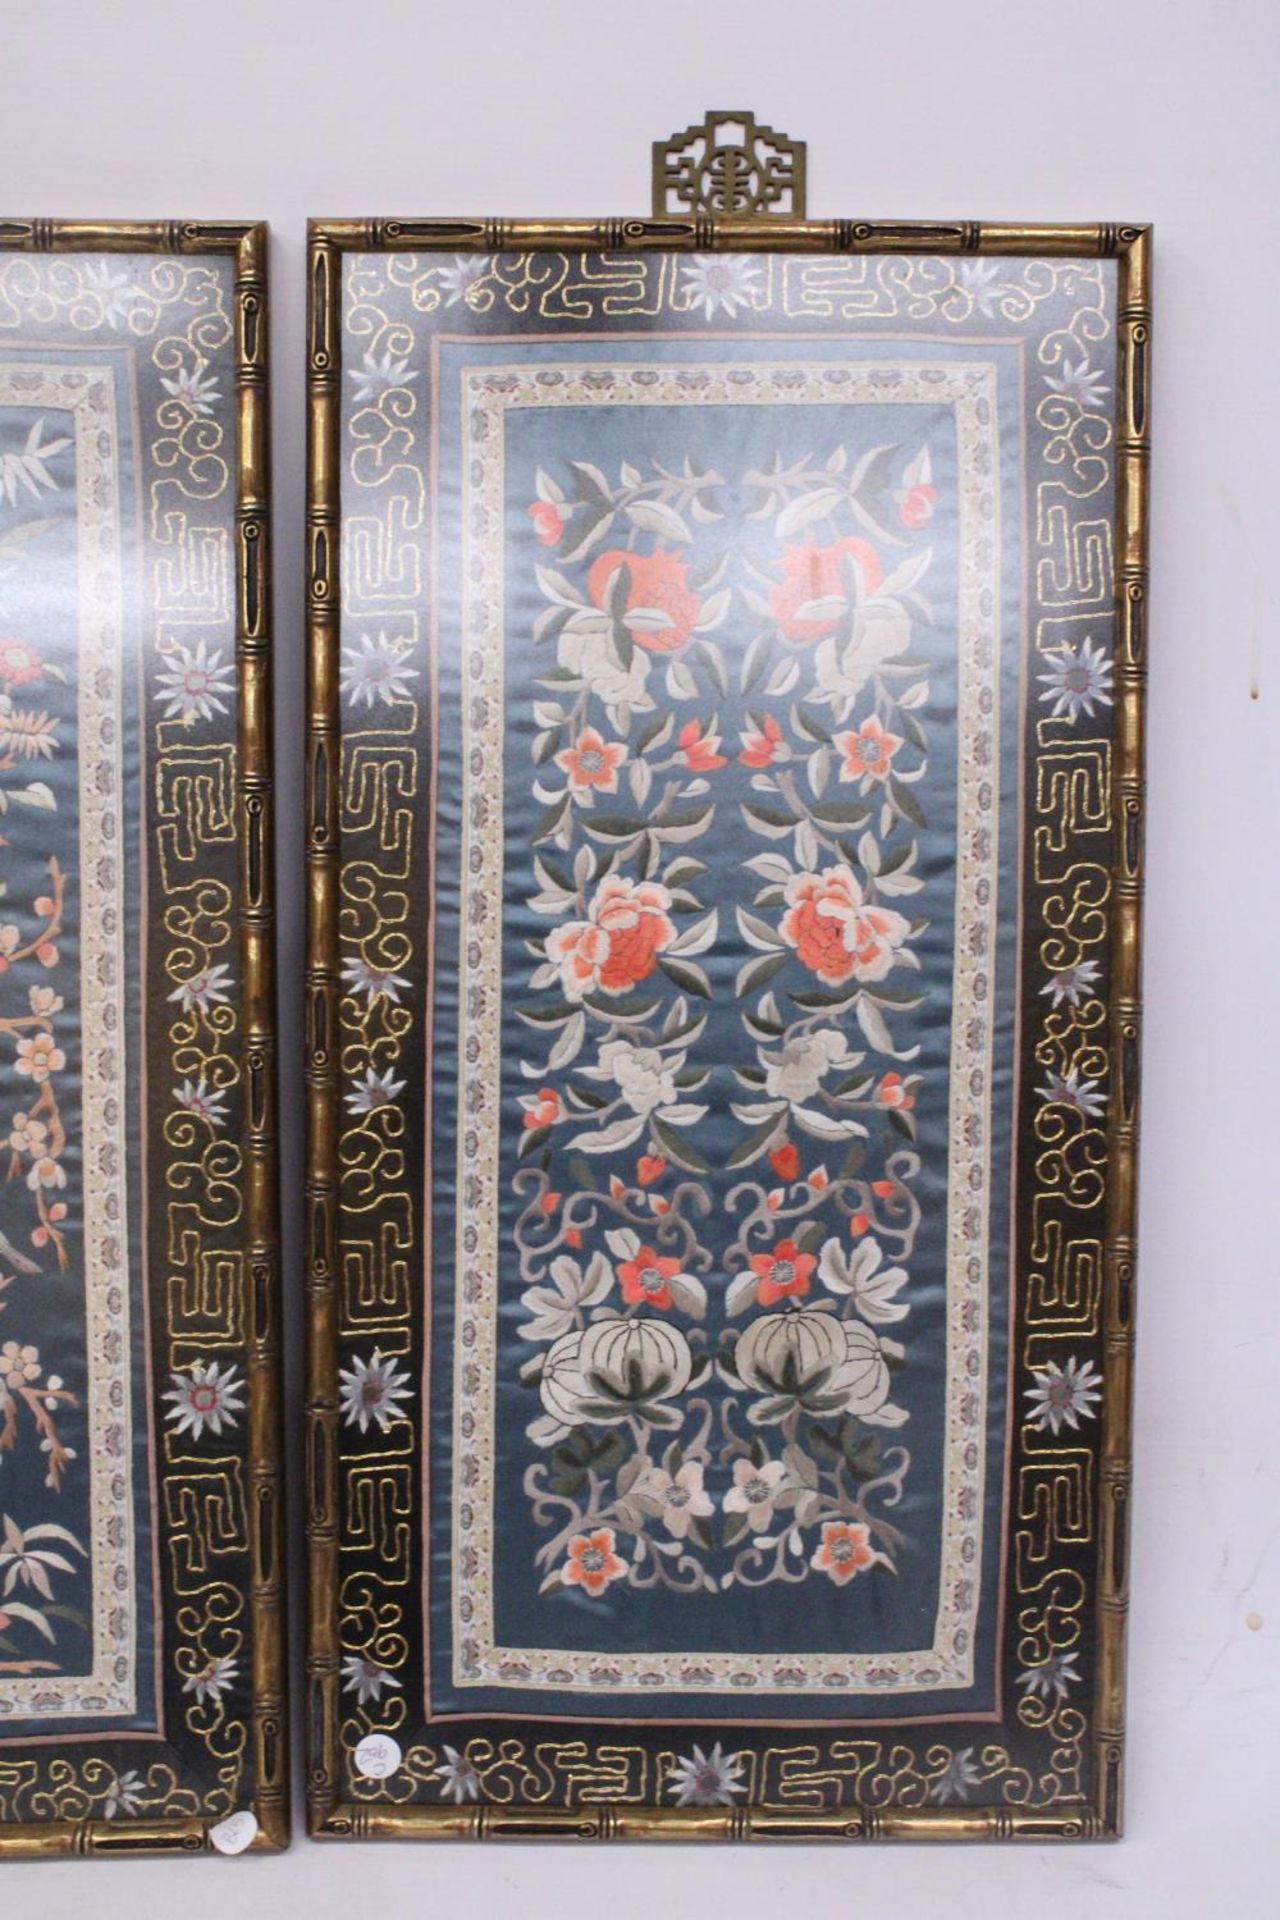 THREE CHINESE SILK EMBROIDERIES DEPICTING A LANDSCAPE SCENE, BIRDS AND FLORALS IN BAMBOO FRAMES - Image 6 of 7